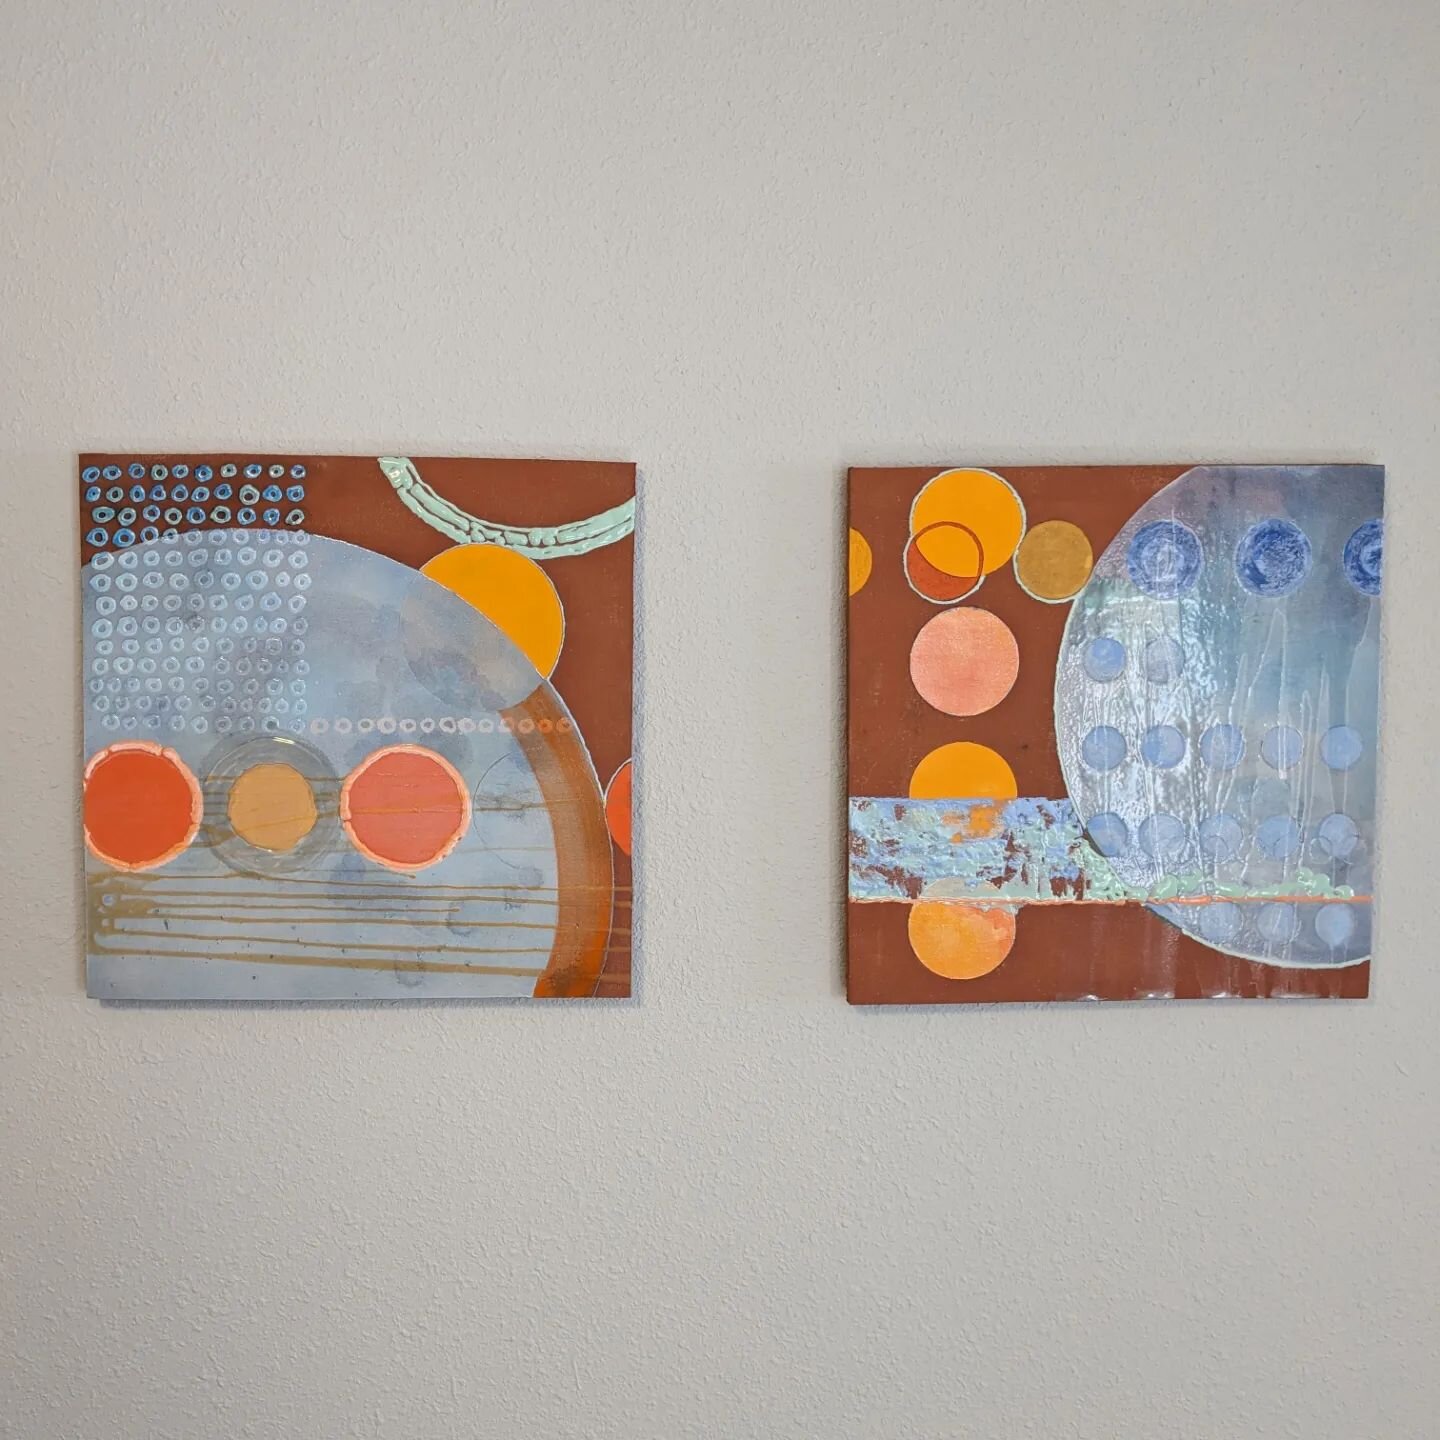 Right now I'm enjoying the swoopy shape made by the areas of bare red clay. Last time I hung these panels they were swapped left/right and the blue-grey glazed sections were a sort of pool.

Left: Lotus 2
Right: Lotus 1
Each 18&quot; x 18&quot;

&quo